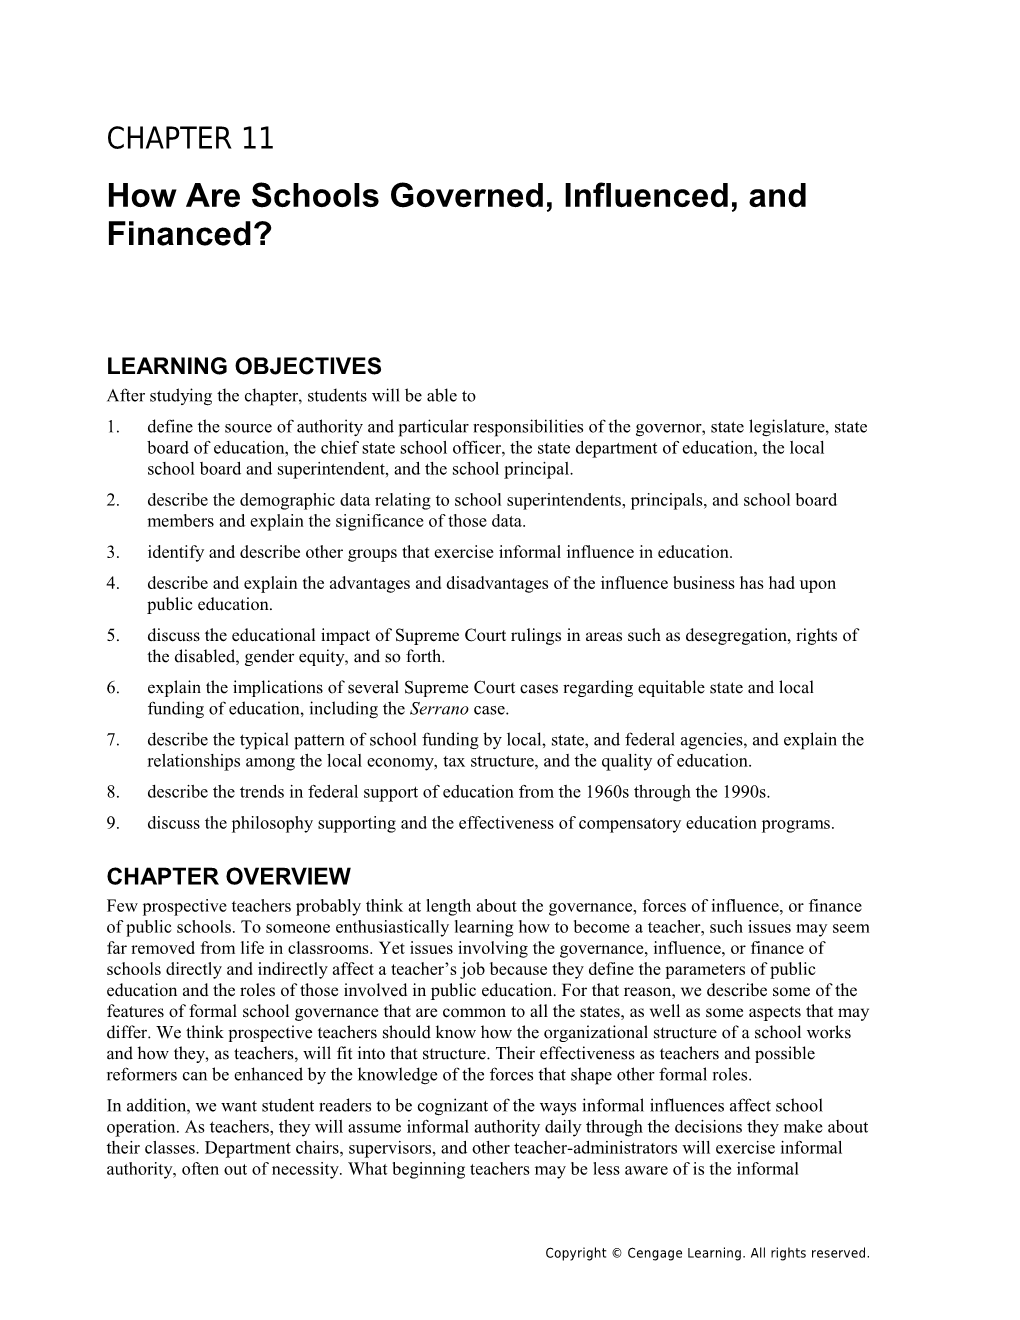 How Are Schools Governed, Influenced, and Financed?